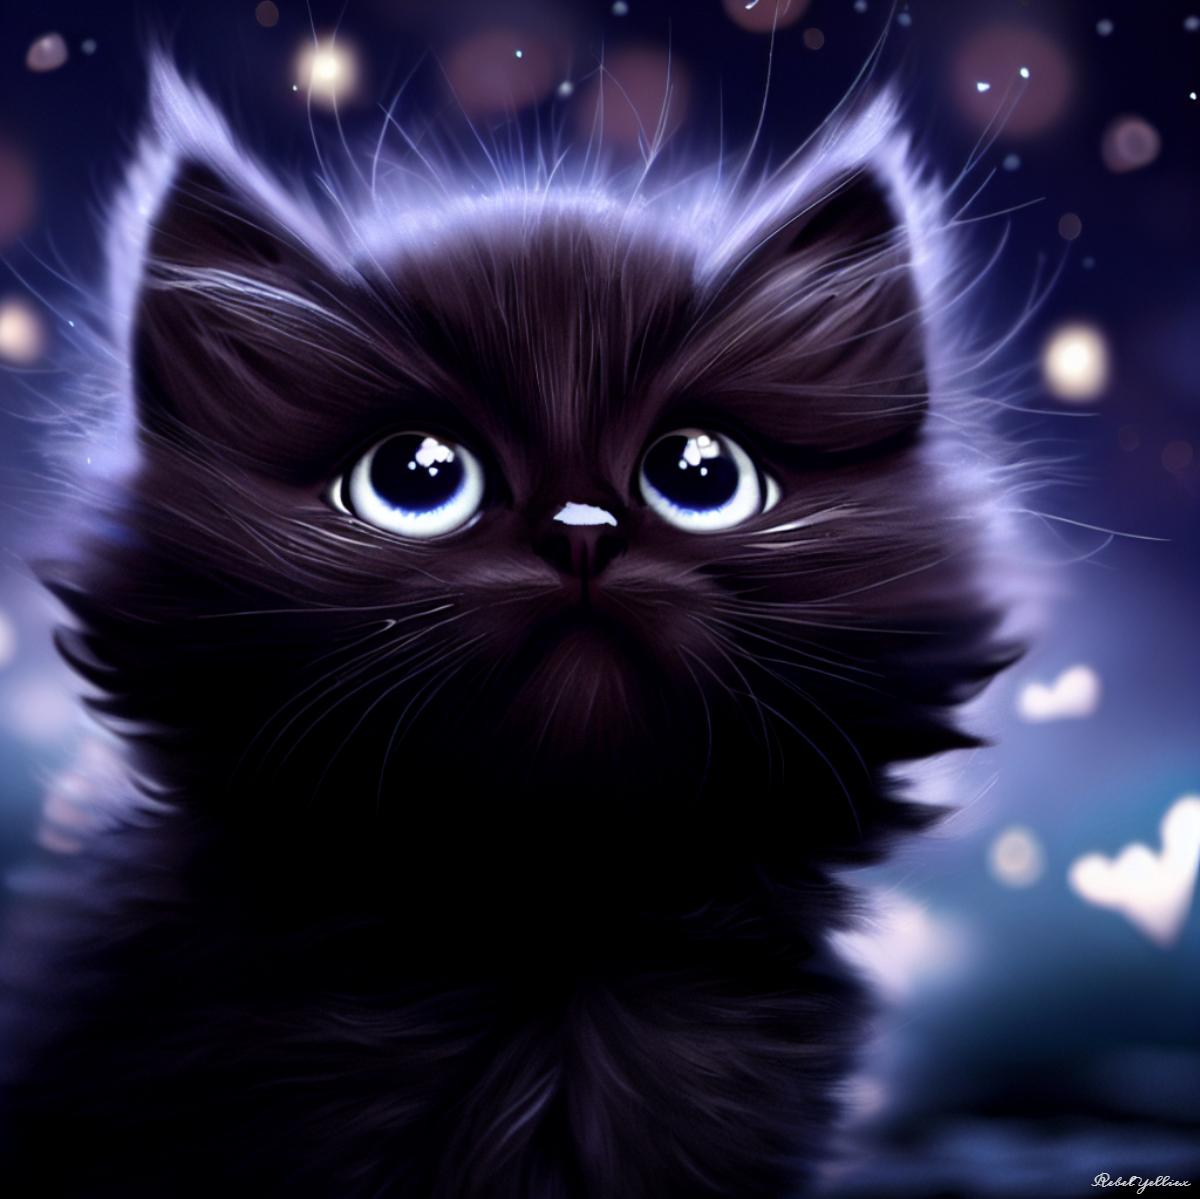 Black Fluffy Kitten Looks Up At Starry Sky By Xrebelyellx On